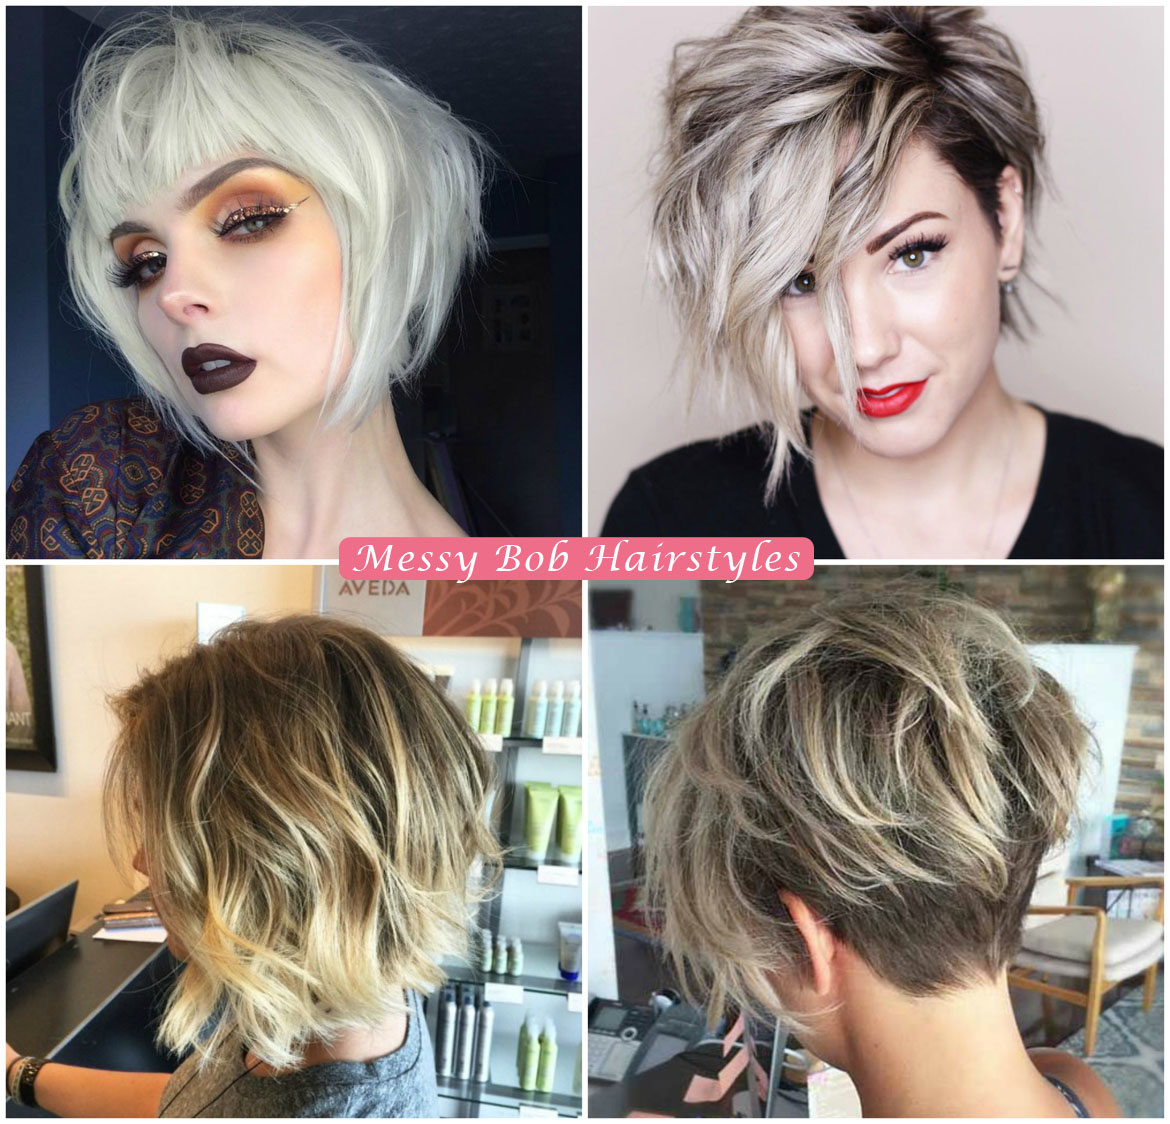 Try Cute Winning Looks With Bob Haircuts Top Beauty Magazines